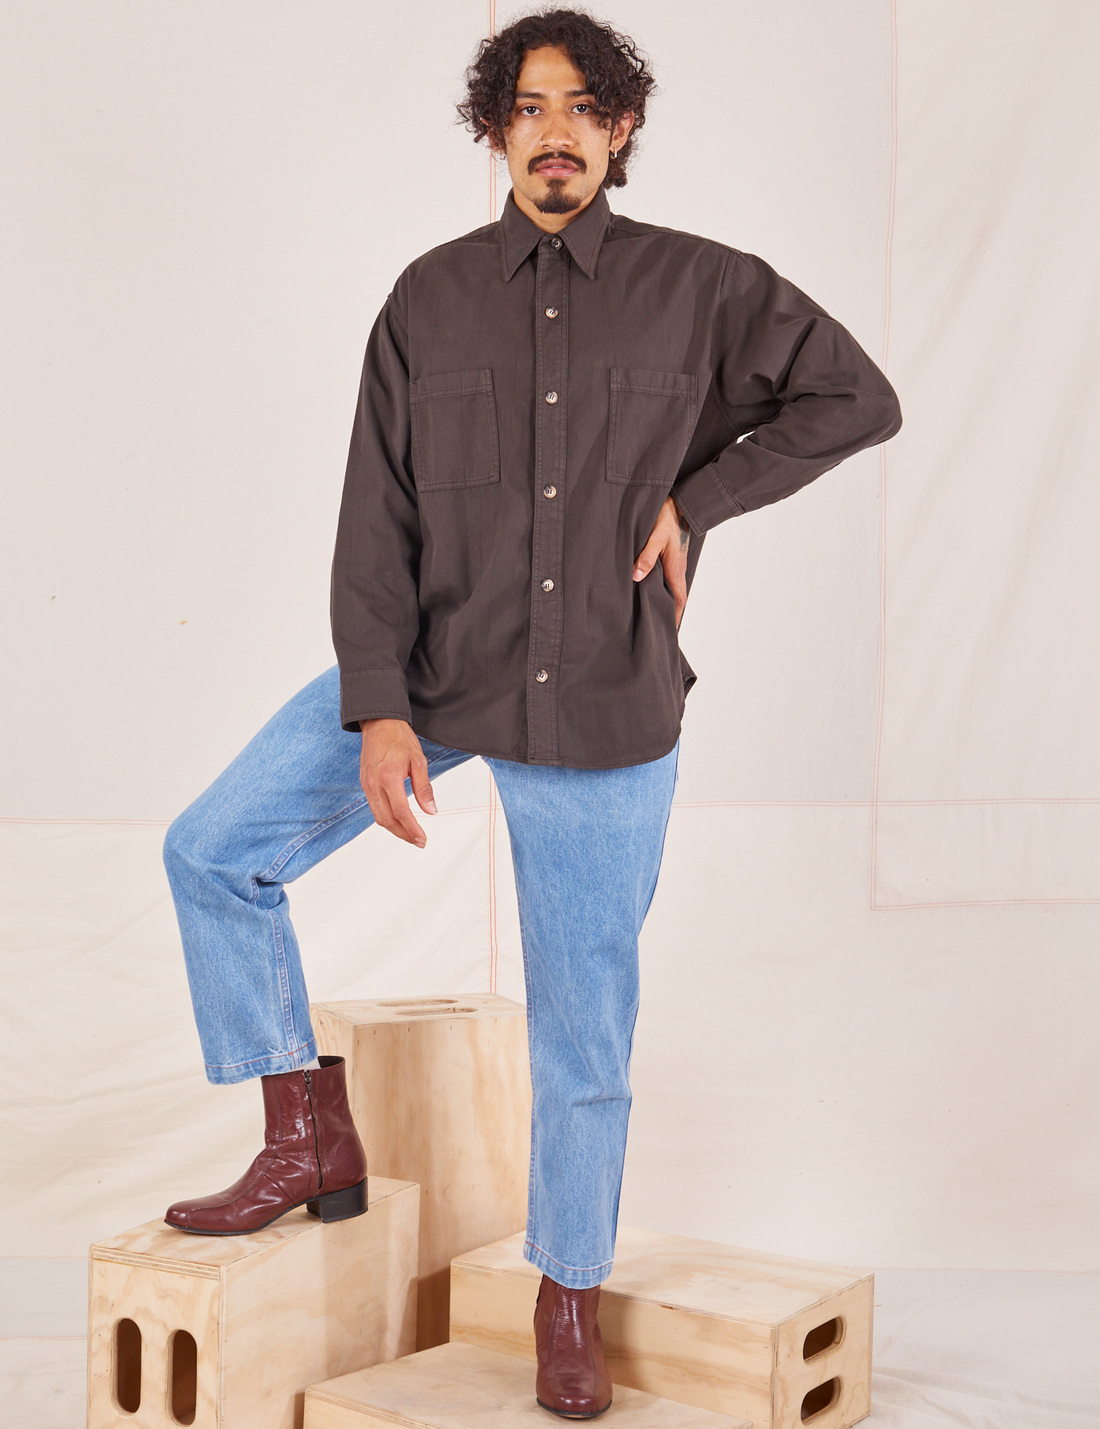 Jesse is wearing a buttoned up Oversize Overshirt in Espresso Brown